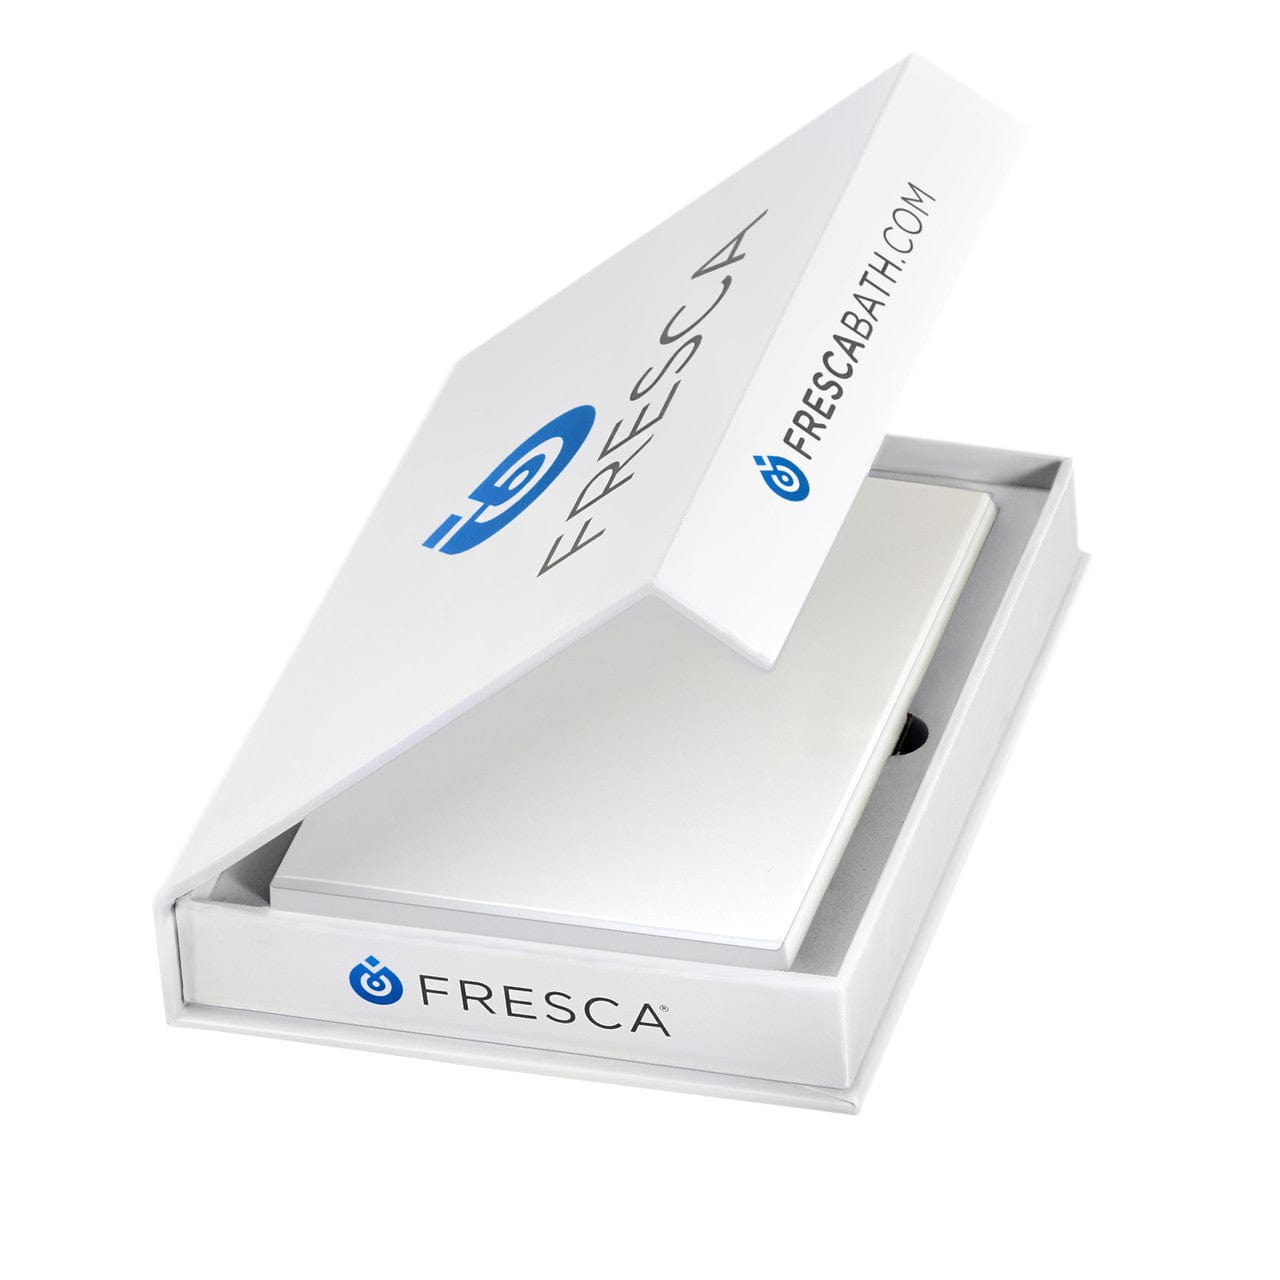 Fresca Wood Color Sample in Glossy White in box